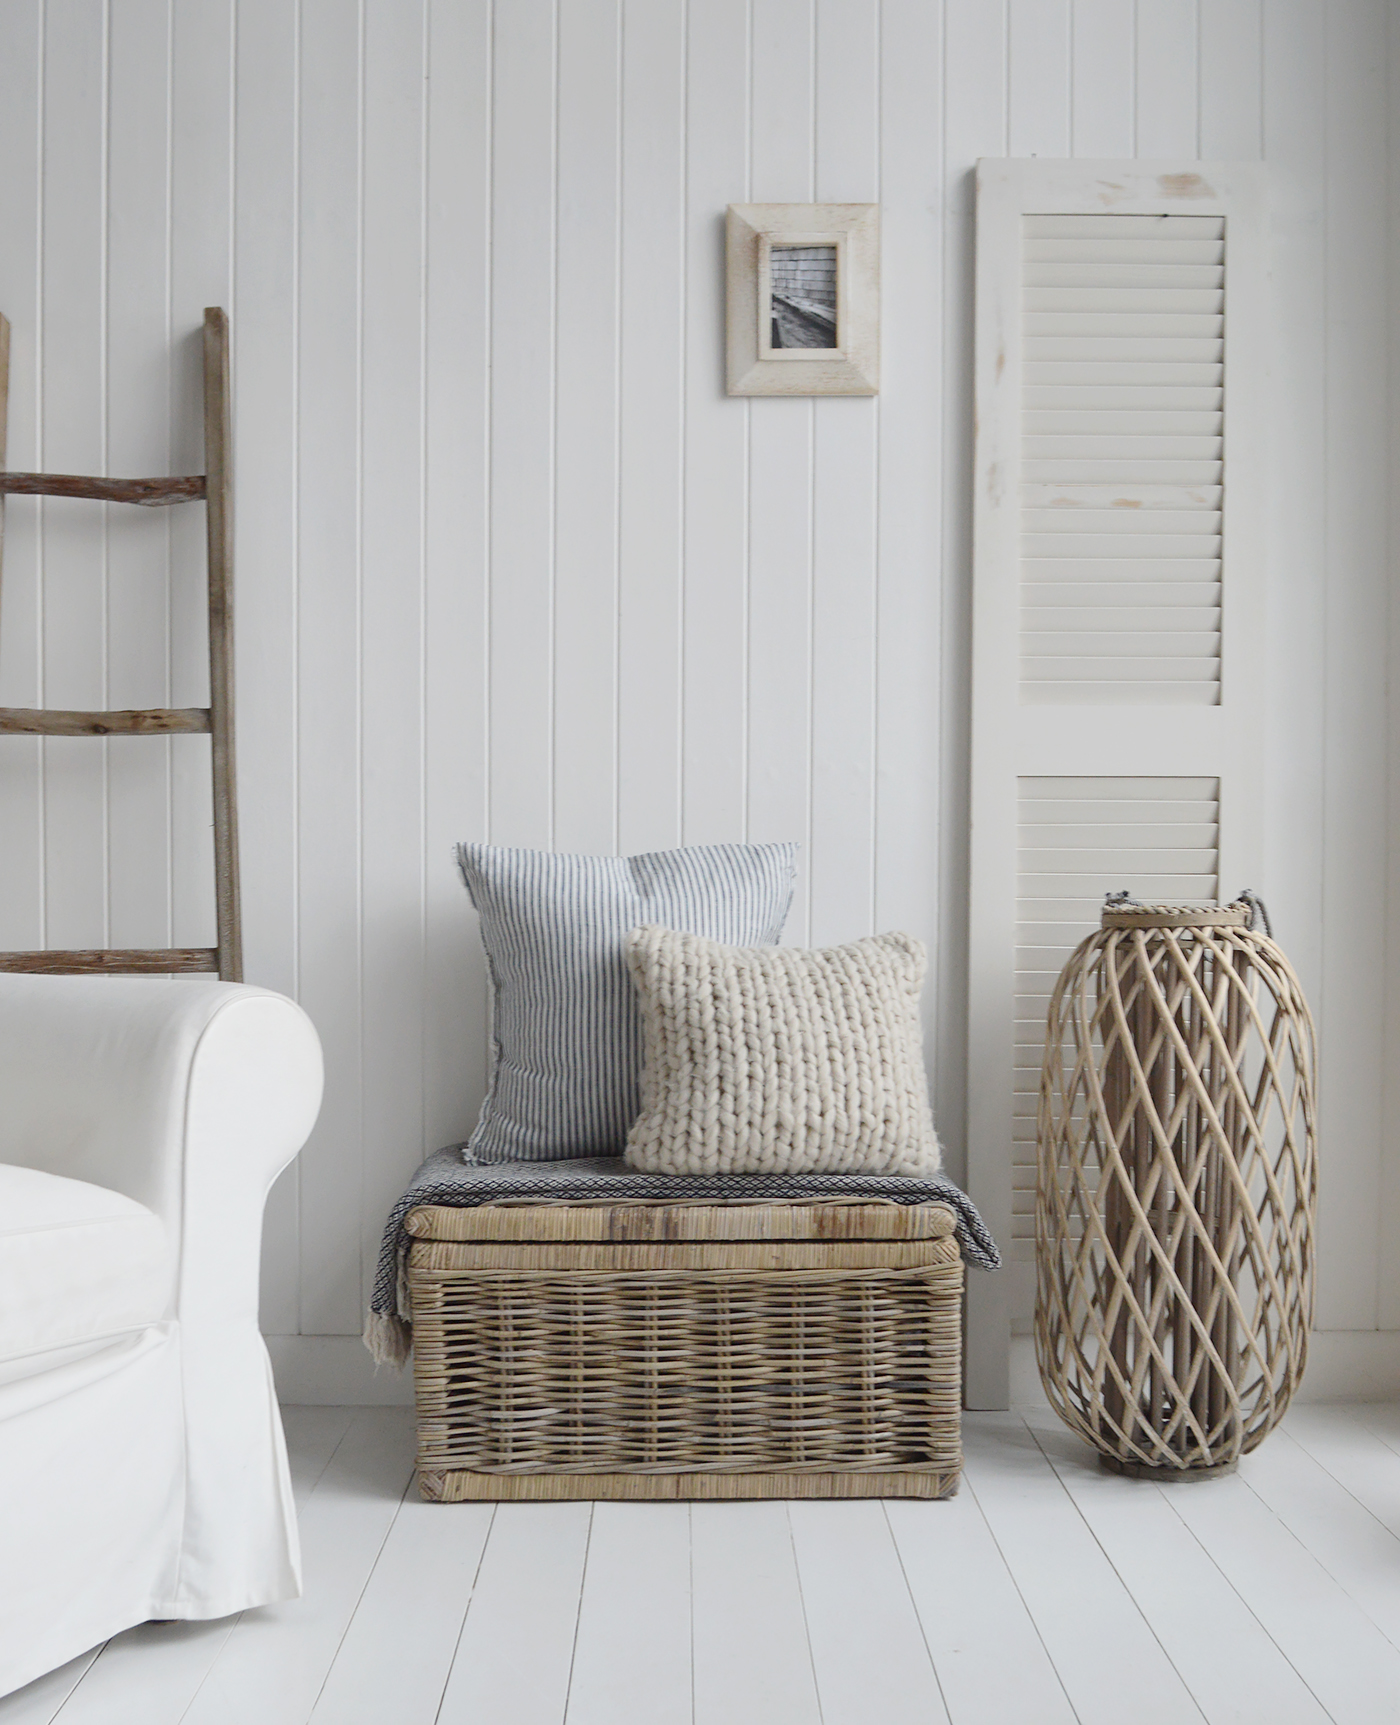 Seaside small as a side table, styled with cushions, throws and pillows, a great idea to offer extra storage in your living room ... modern farmhouse and coastal furniture ideas